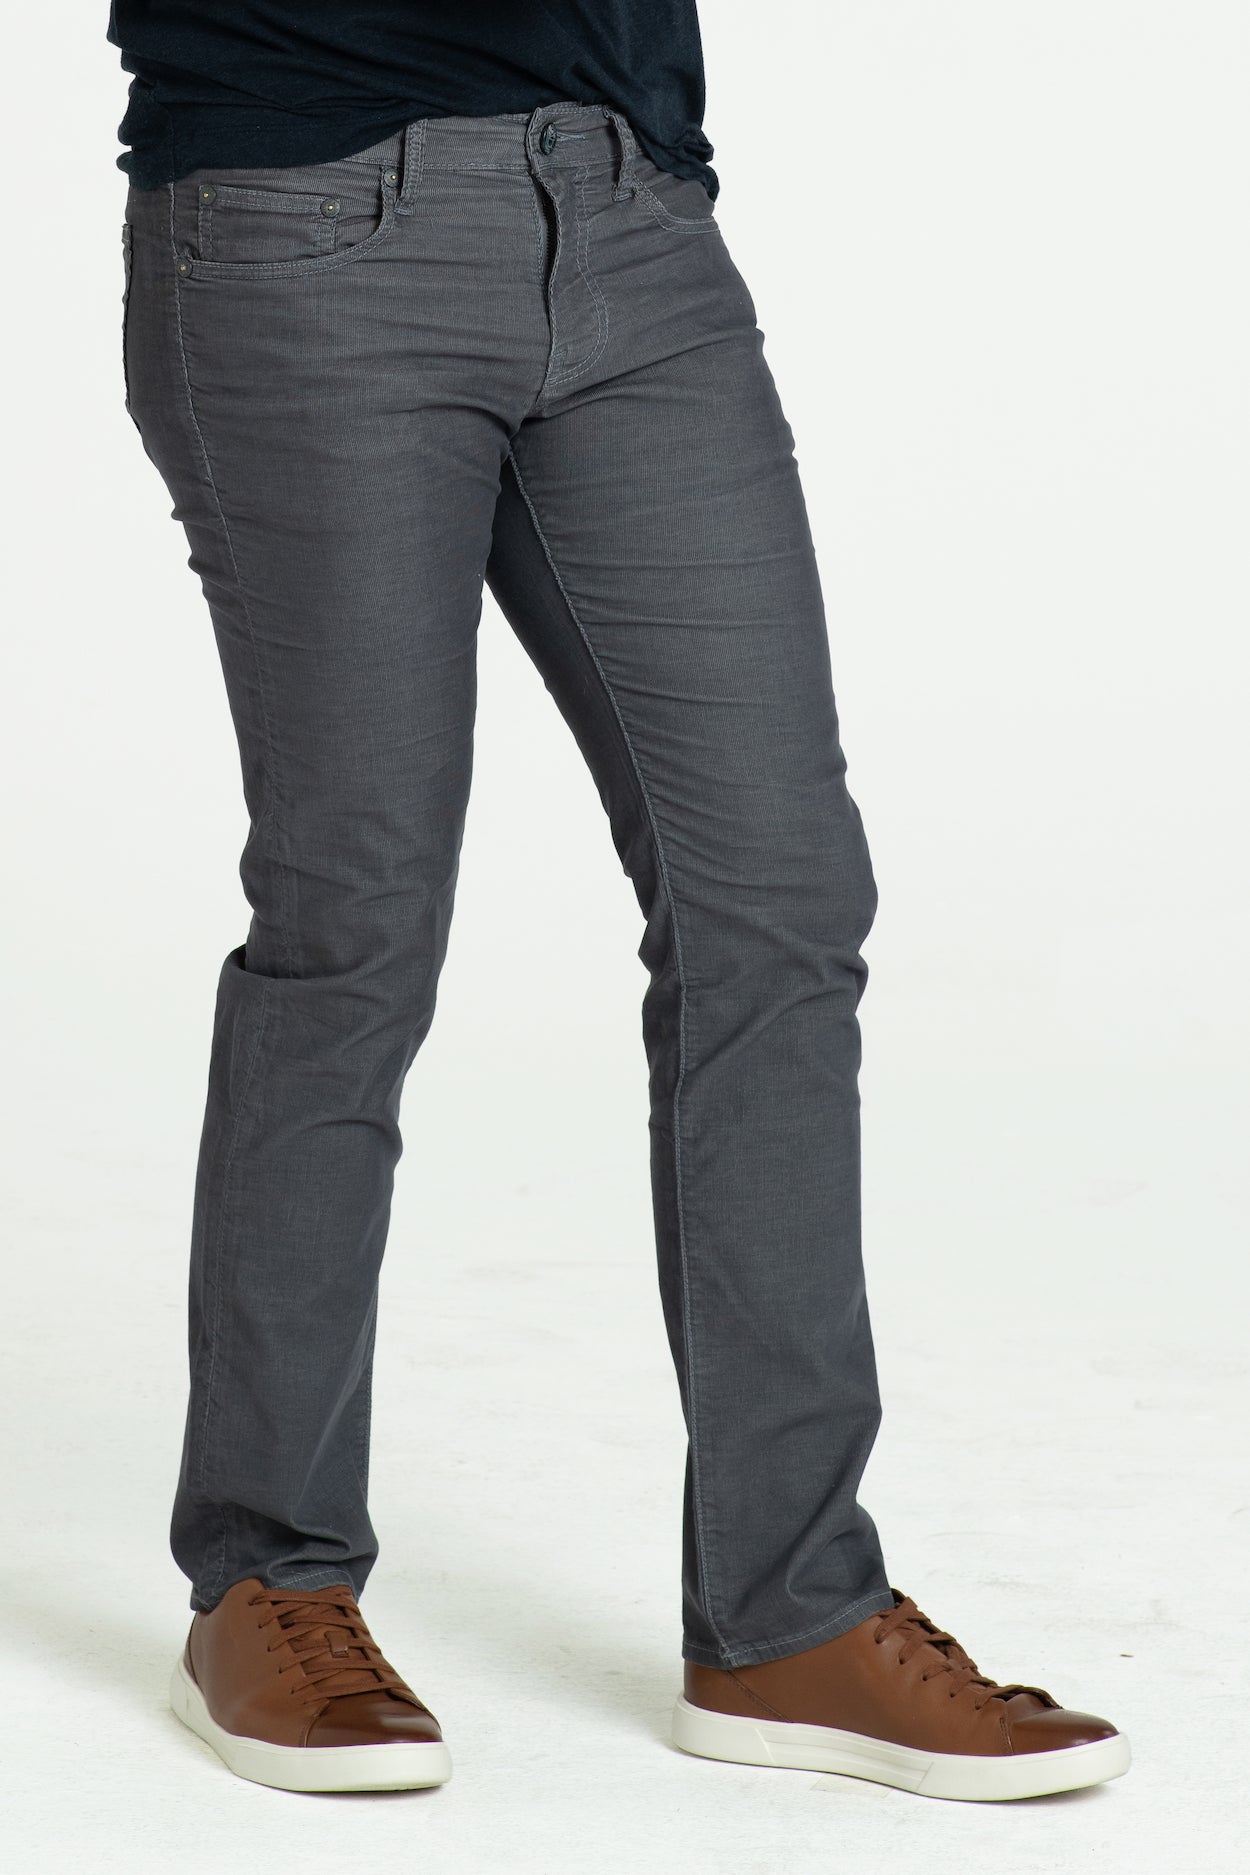 BARFLY SLIM CORD PANTS IN STORM